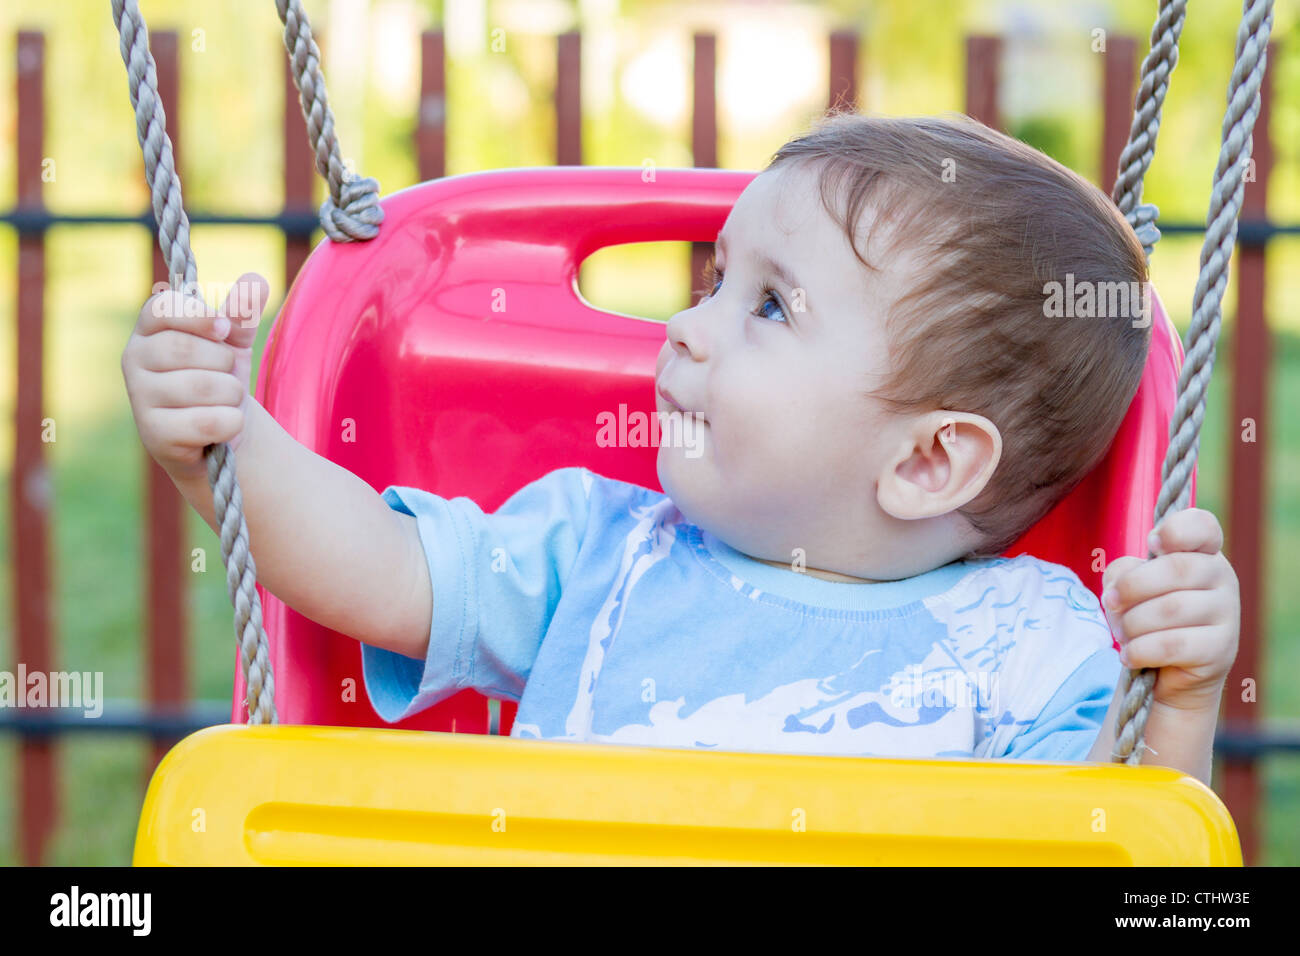 9-month old baby boy in a swing outdoors Stock Photo